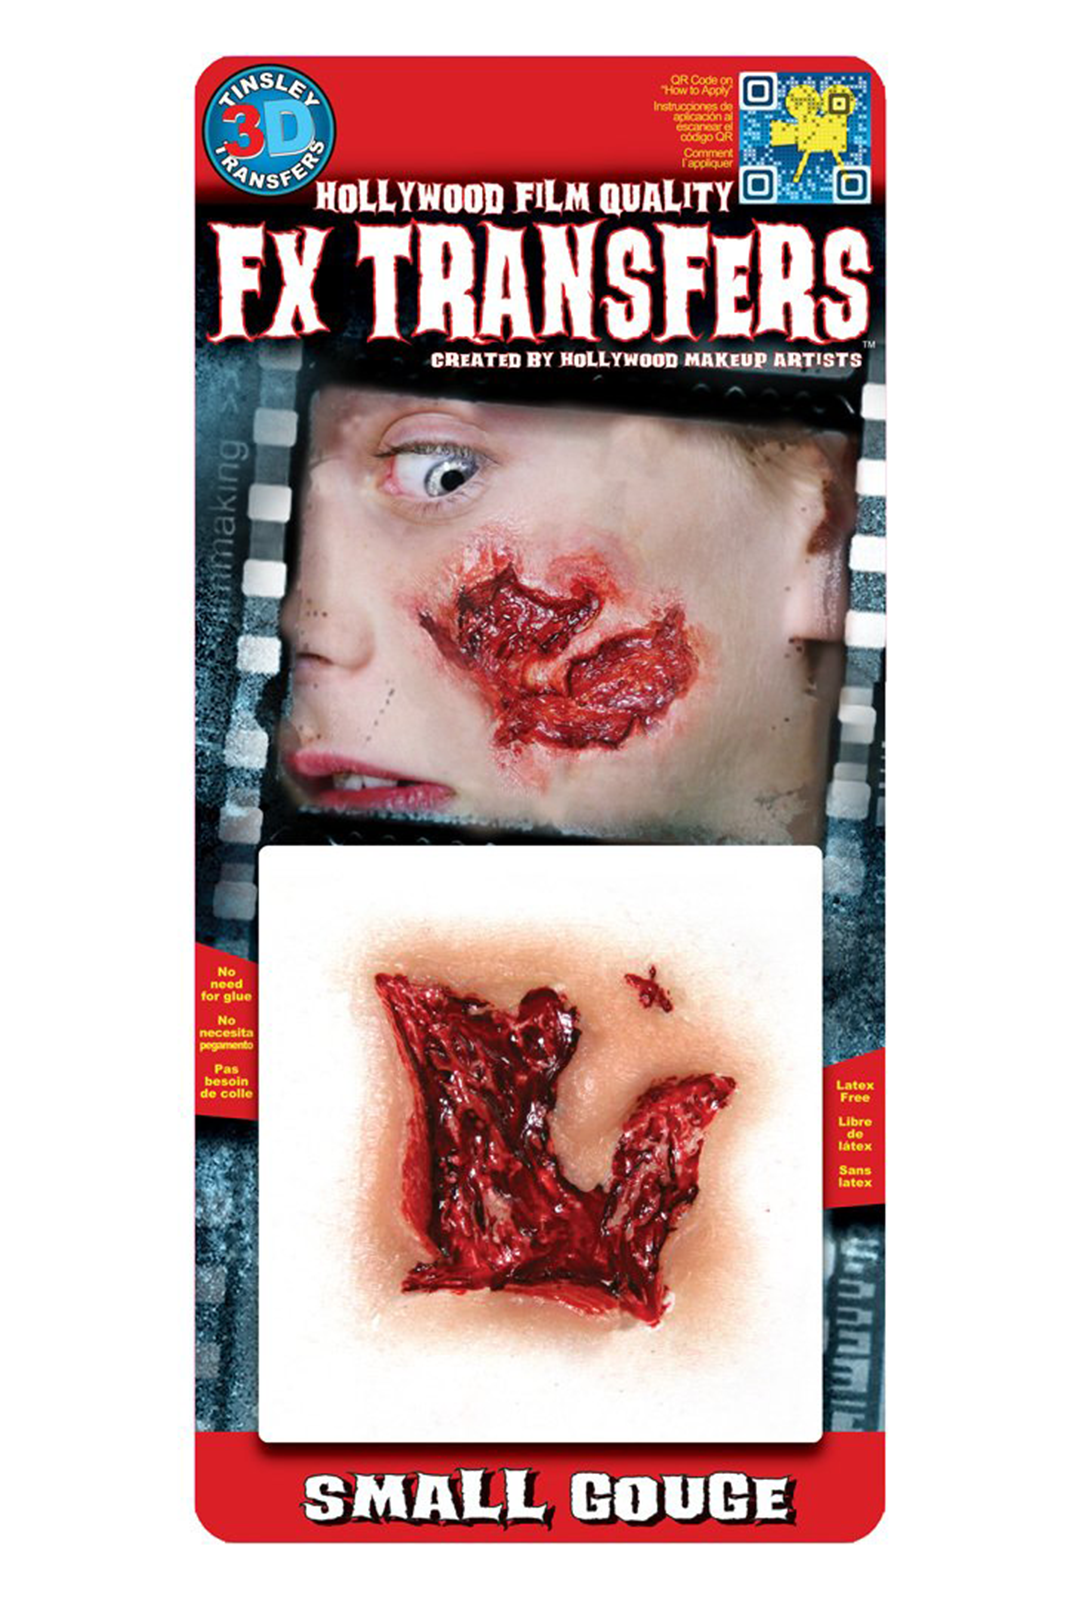 Small Gouge Special FX Transfer